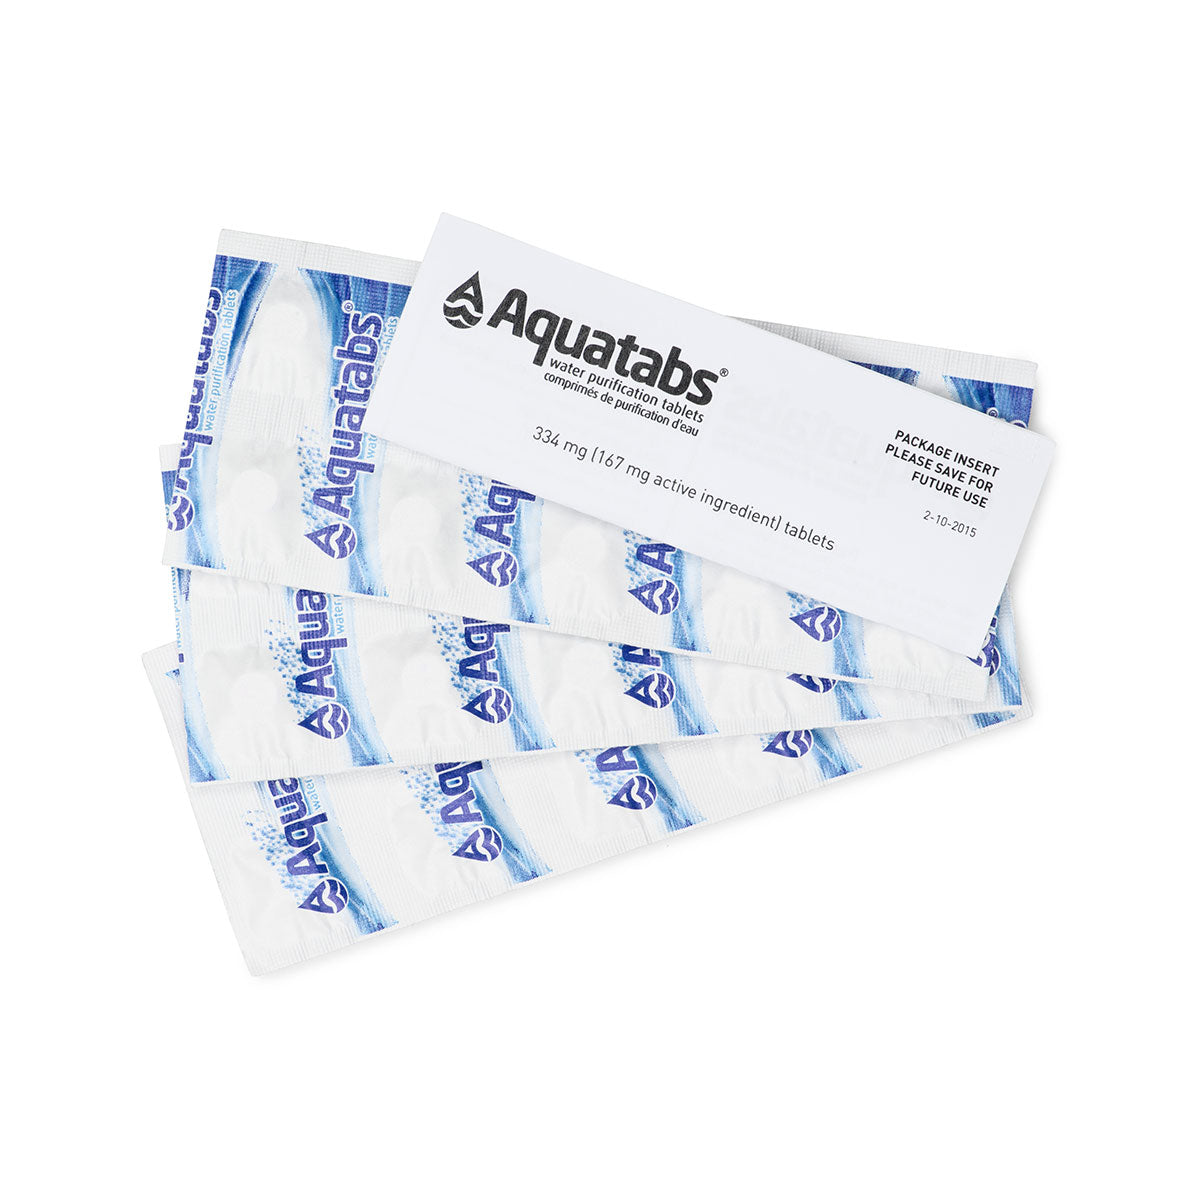 Aquatabs-Water-Purification-Tablets-334mg-Foil-Package-Instructions